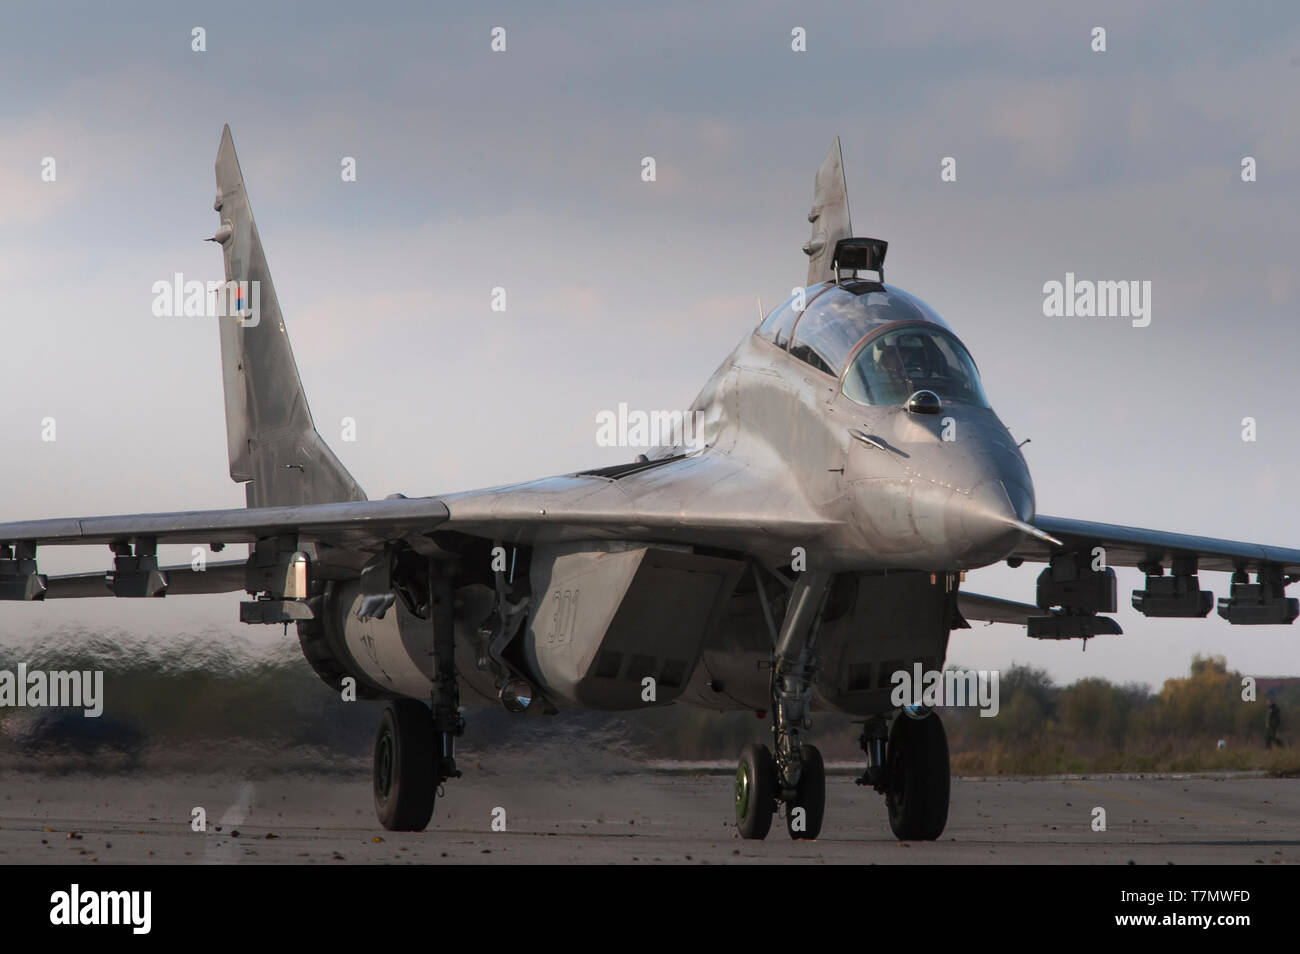 Serbian Air Force Soviet-made MiG-29 (NATO reporting name: Fulcrum) air superiority fighter jet combat aircraft Stock Photo